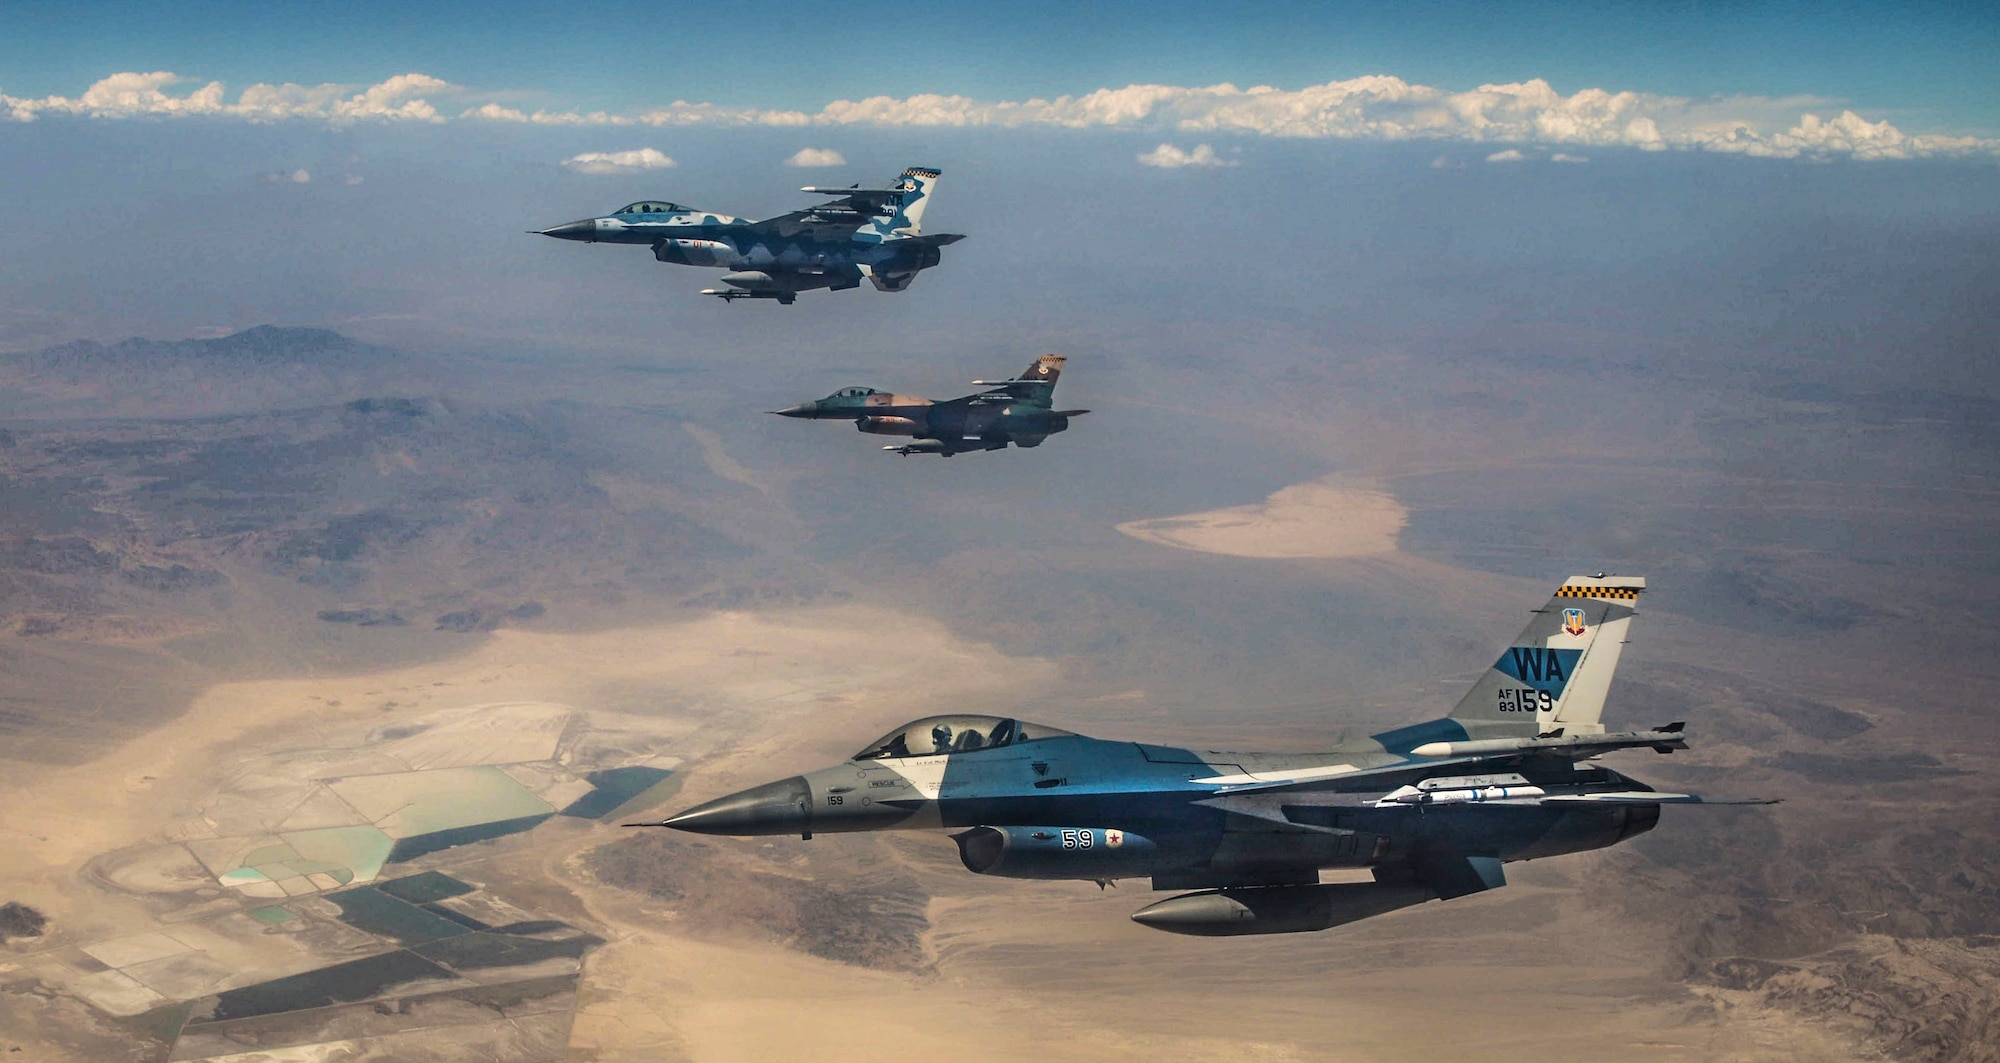 Three F-16 Fighting Falcon fighter jets assigned to the 64th Aggressors Squadron (AGRS) fly over the Nevada Test and Training Range during Red Flag 18-3. The 64th AGRS served as part of the red forces during Red Flag 18-3 to prepare combat air forces, joint and allied aircrews for tomorrow's victories with challenging and realistic scenarios. (U.S. Air Force photo by Airman Bailee A. Darbasie)